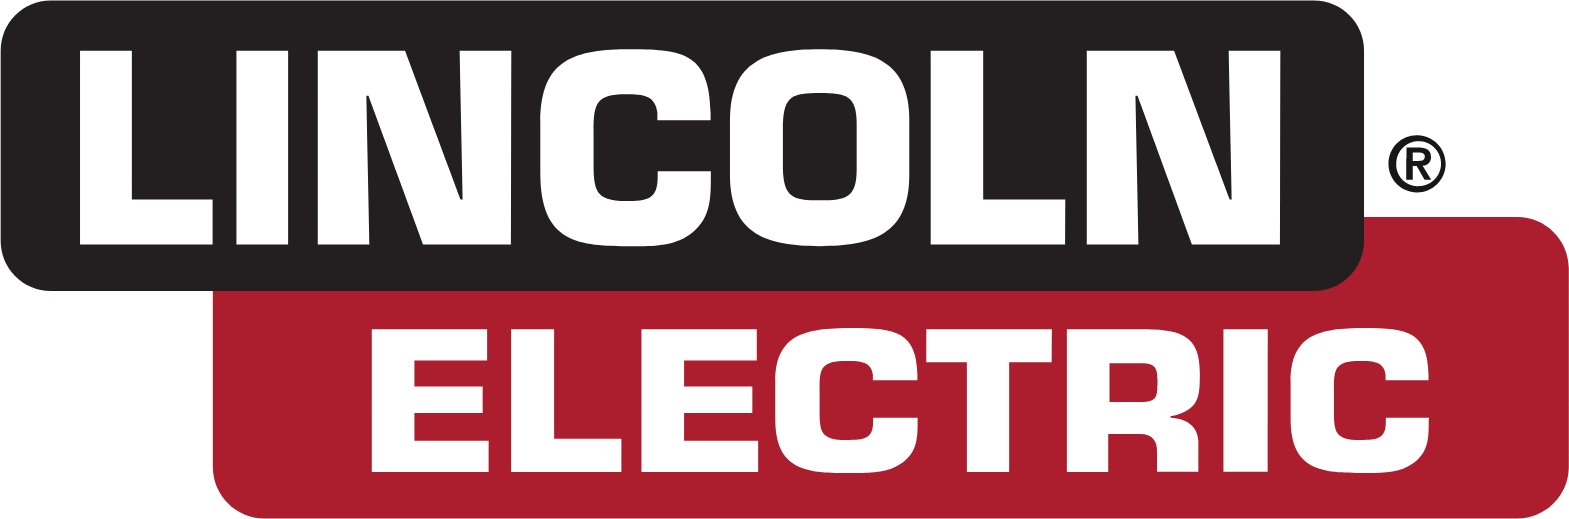 Lincoln Electric
 logo (transparent PNG)